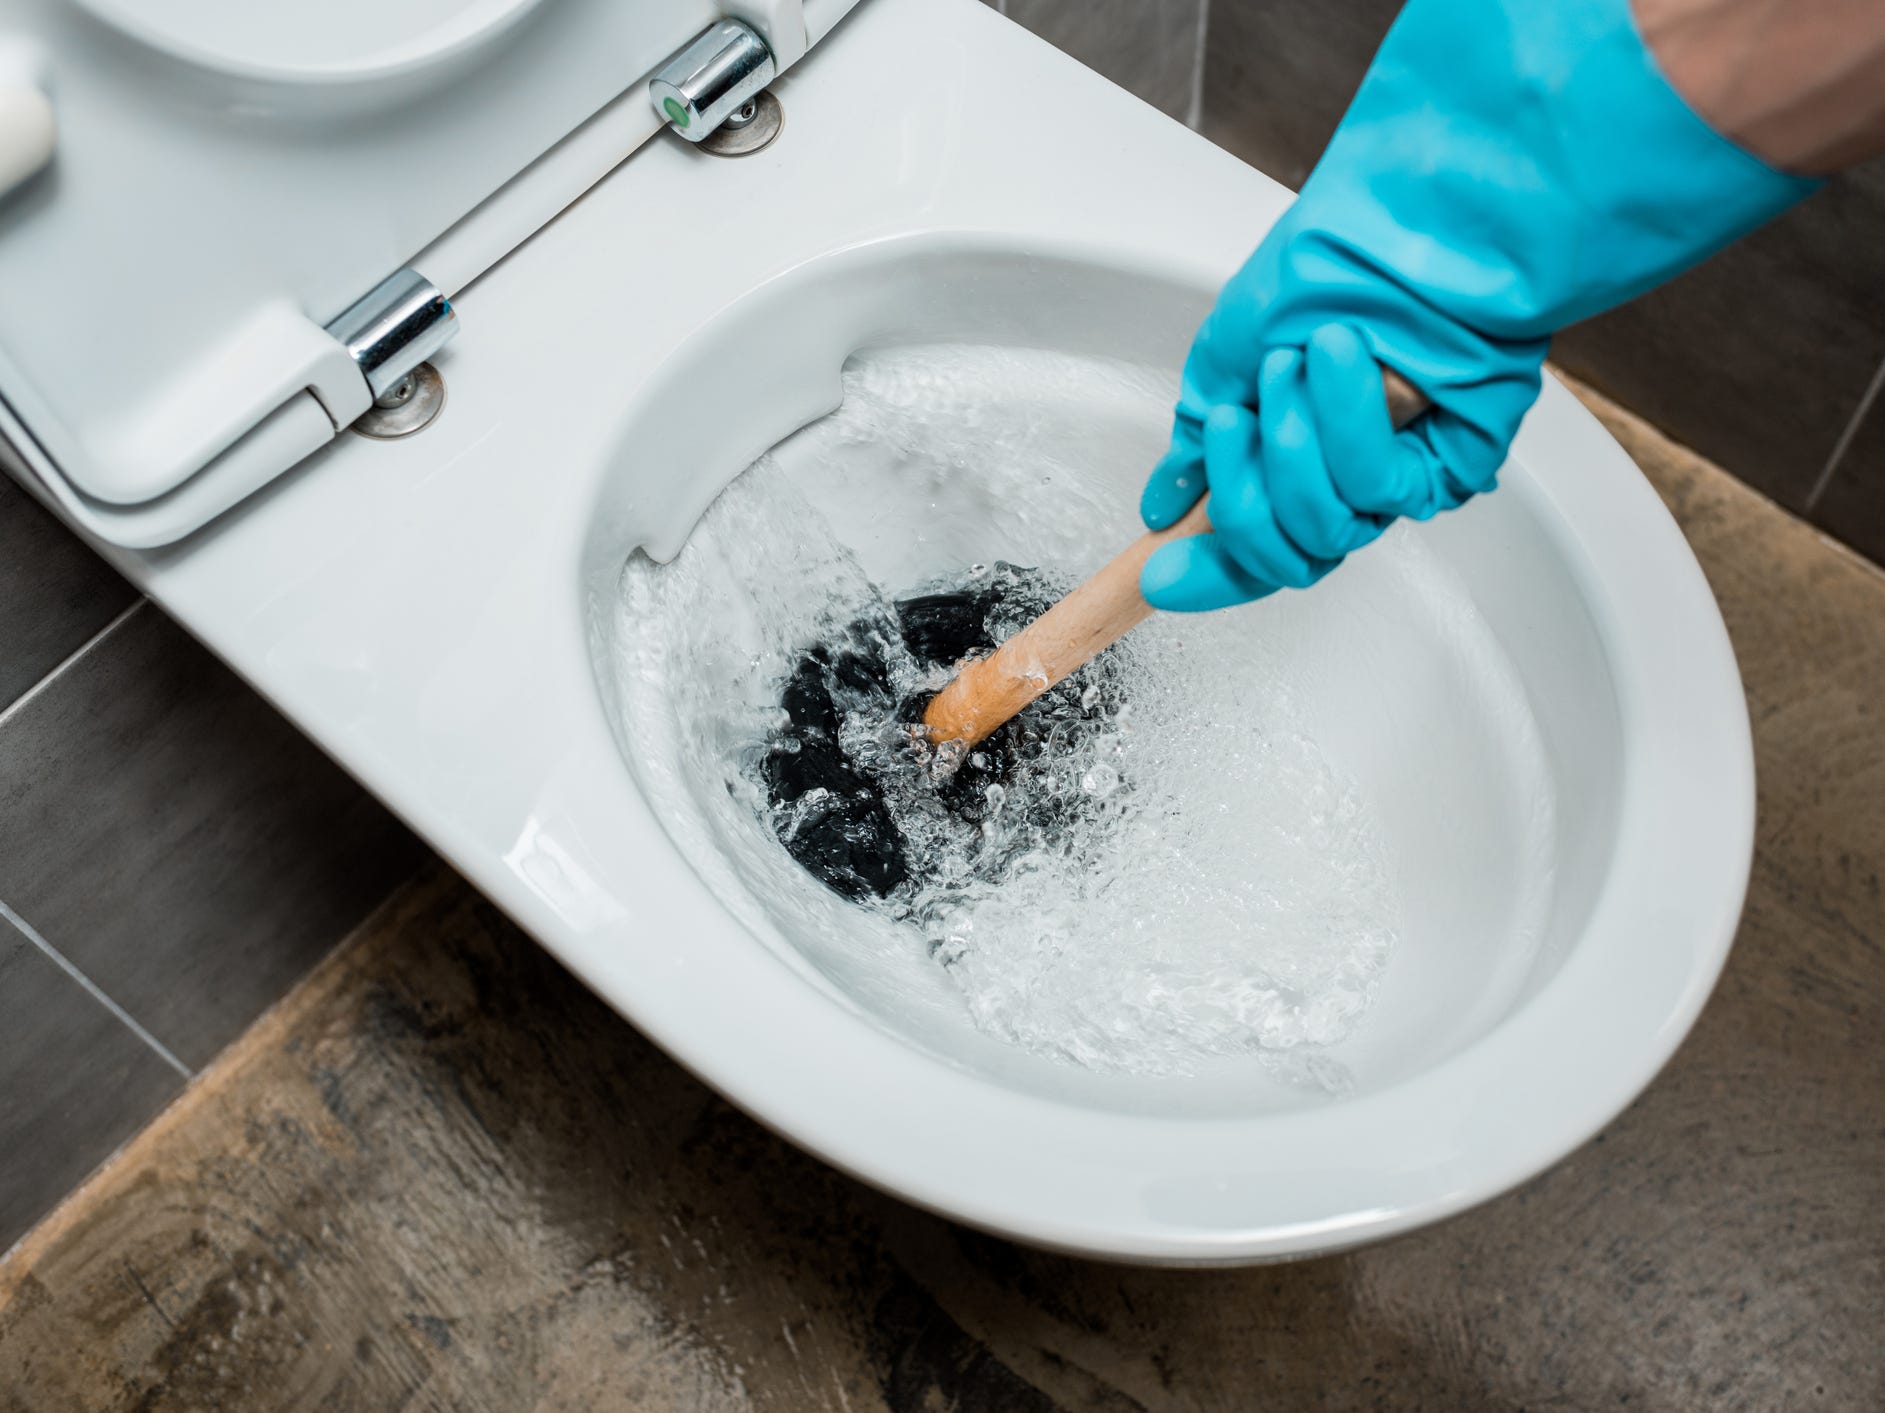 A hand in a blue cleaning glove using a plunger on a toilet